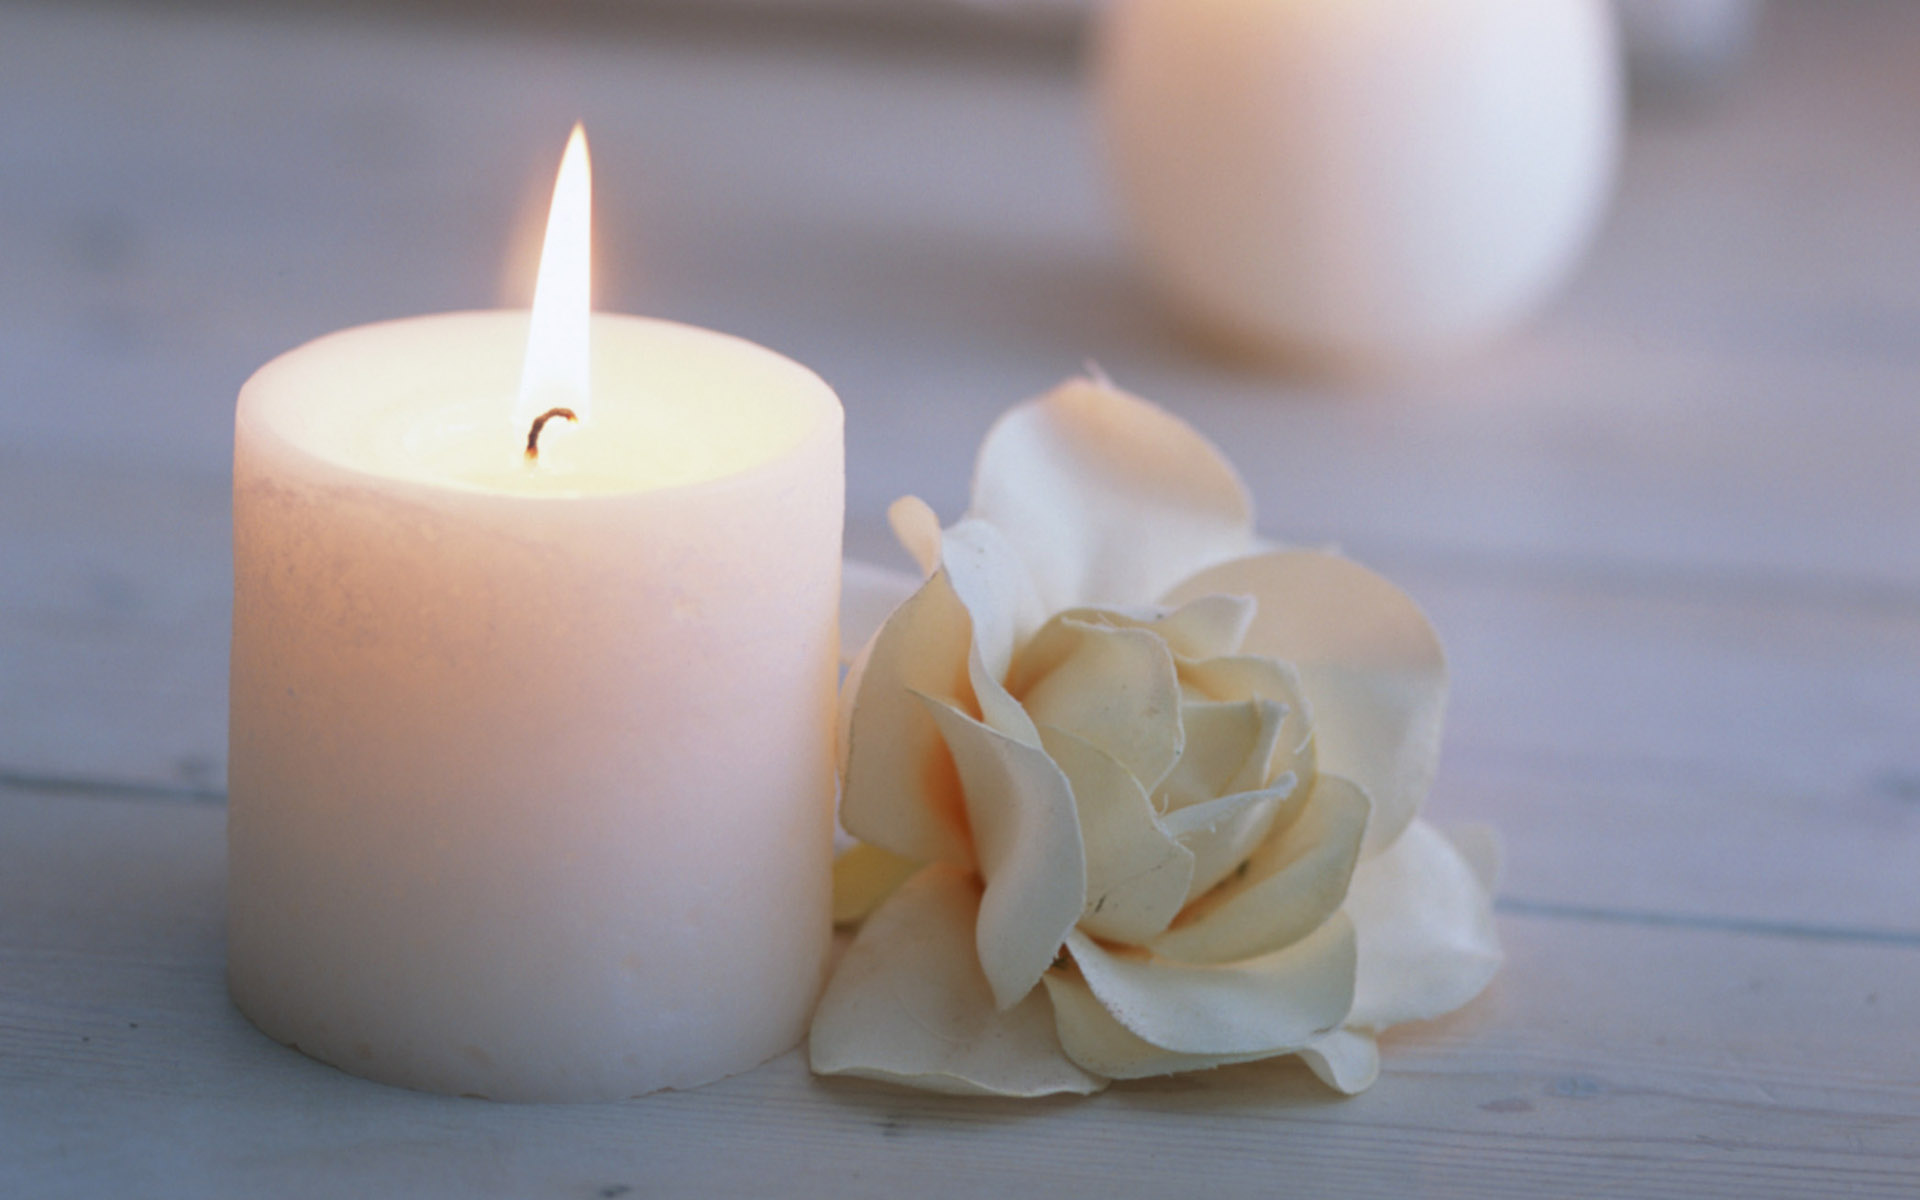 Candle Wallpaper - White Candle And Flower - HD Wallpaper 